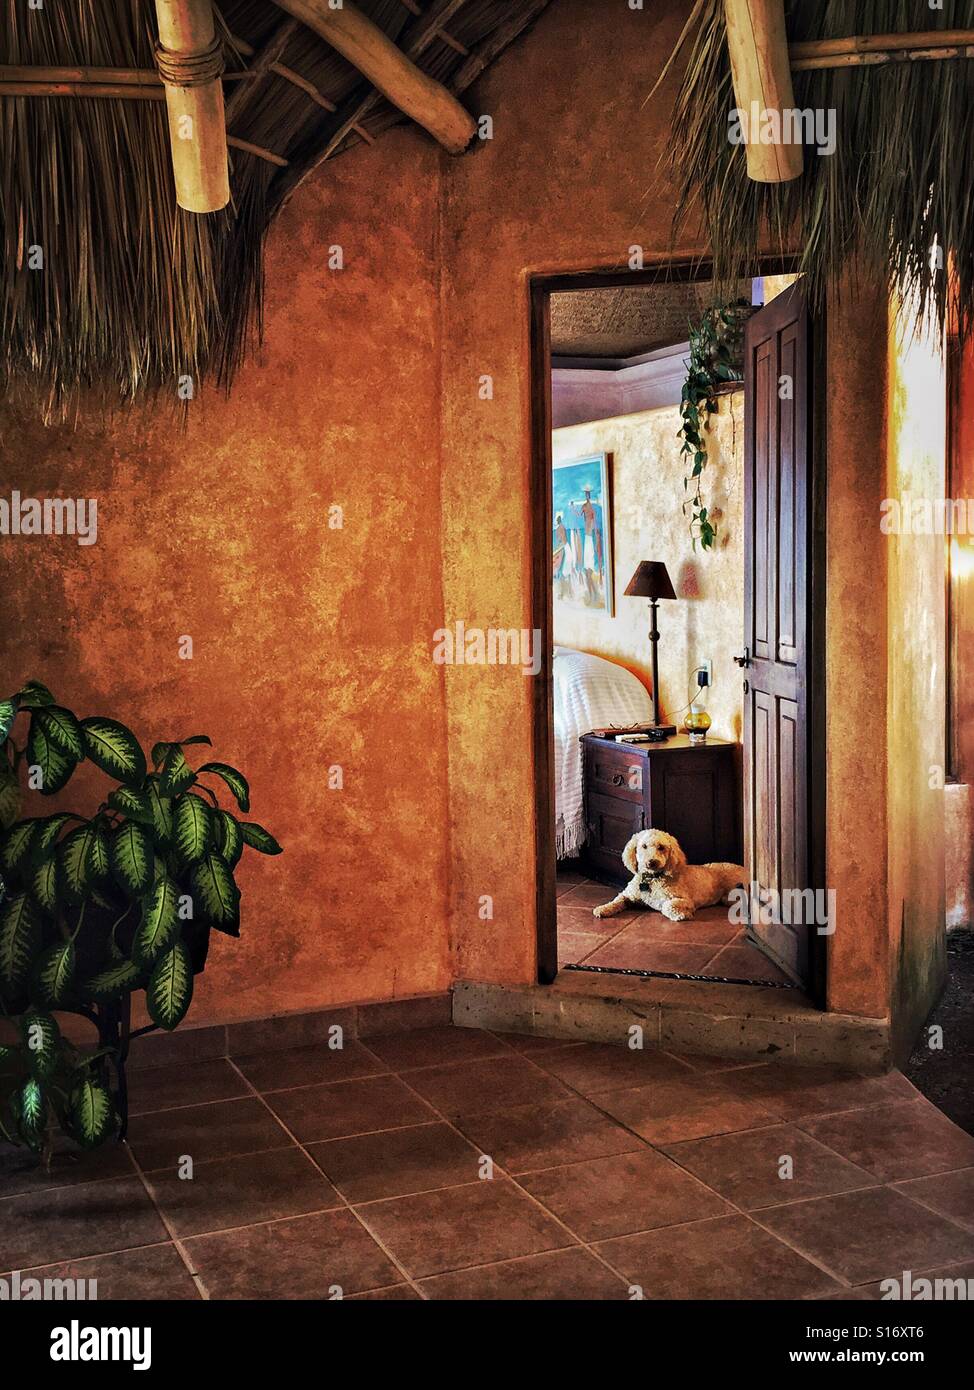 An open doorway to a bedroom in a tropical home under a palapa roof shows a glimpse of the room and a dog relaxing on the floor. Stock Photo